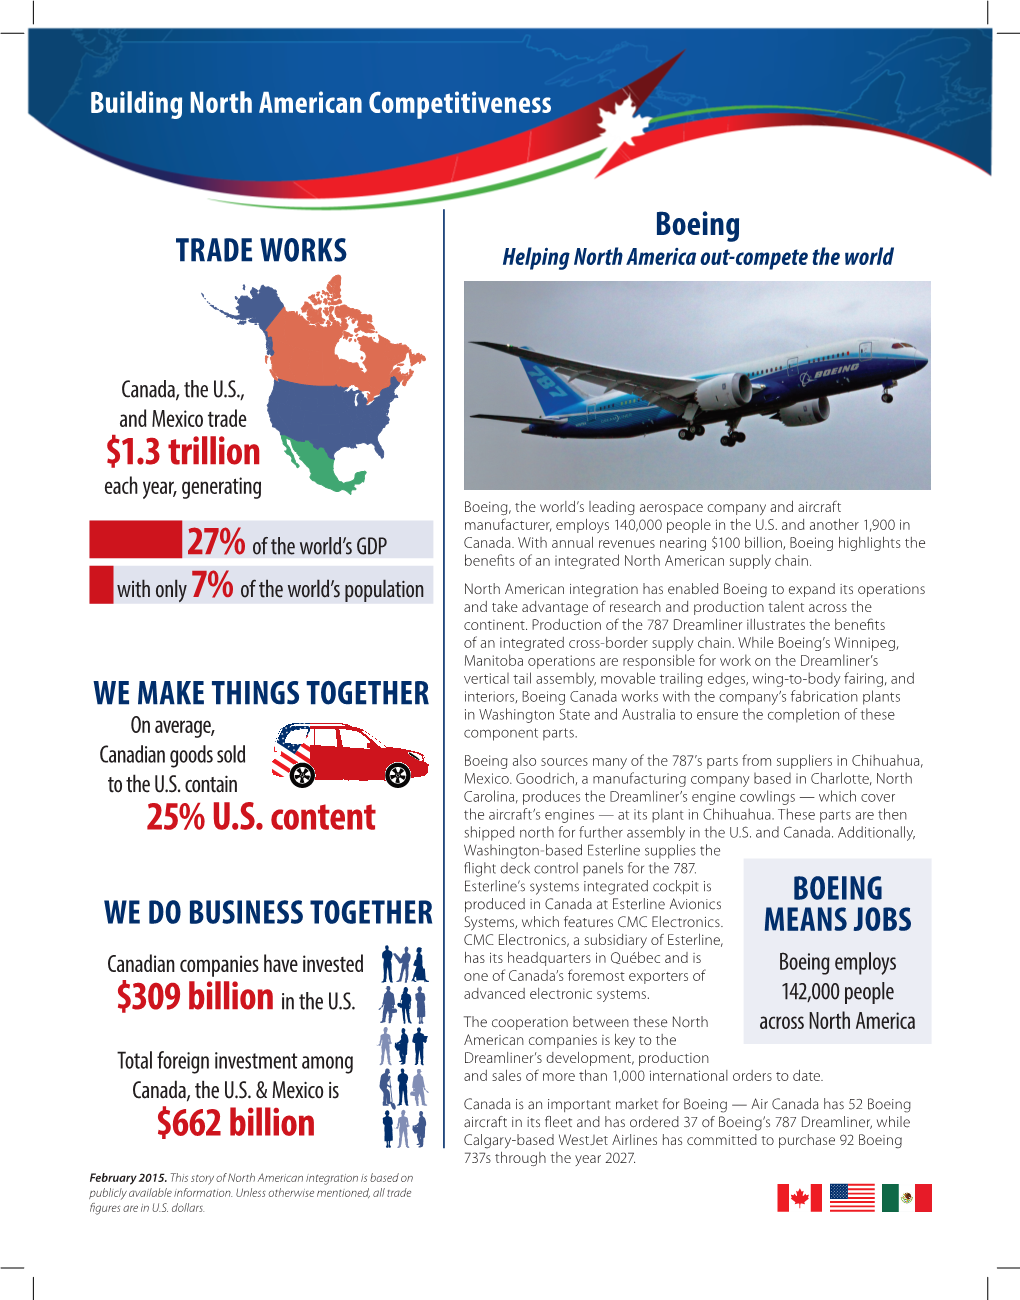 Boeing TRADE WORKS Helping North America Out-Compete the World